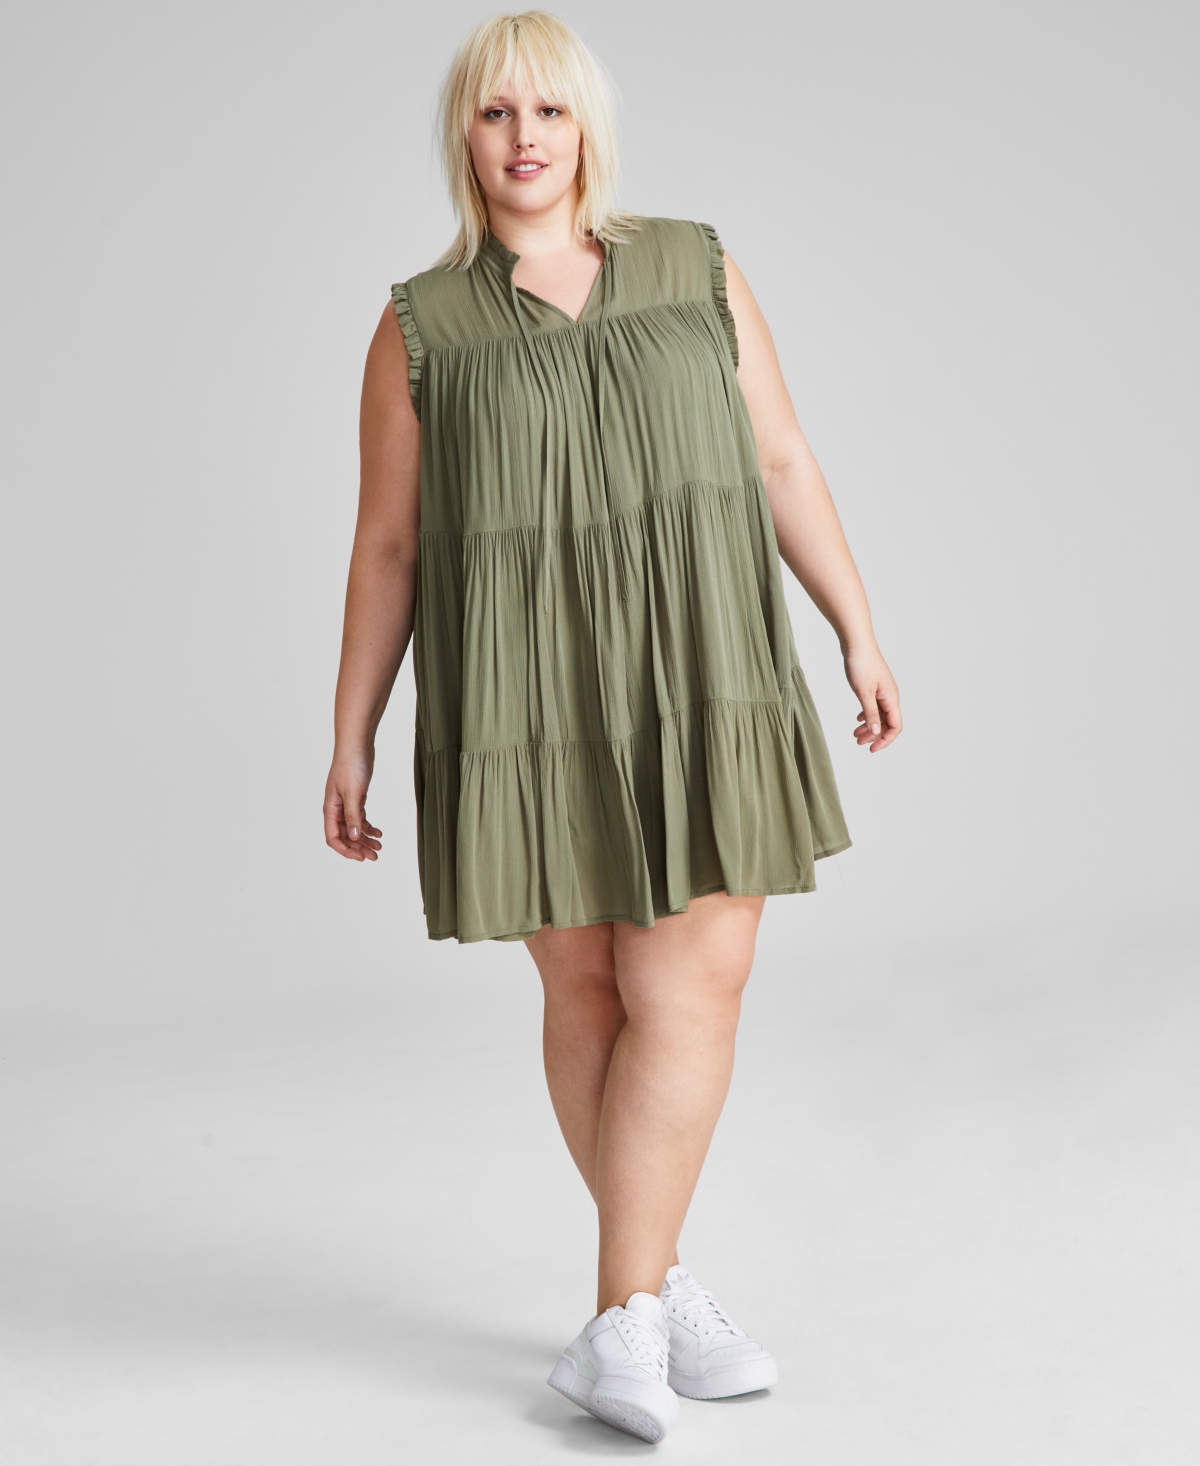 Shop And Now This Women's Sleeveless Tiered Dress, Xxs-4x, Created For Macy's In Crushed Oregano